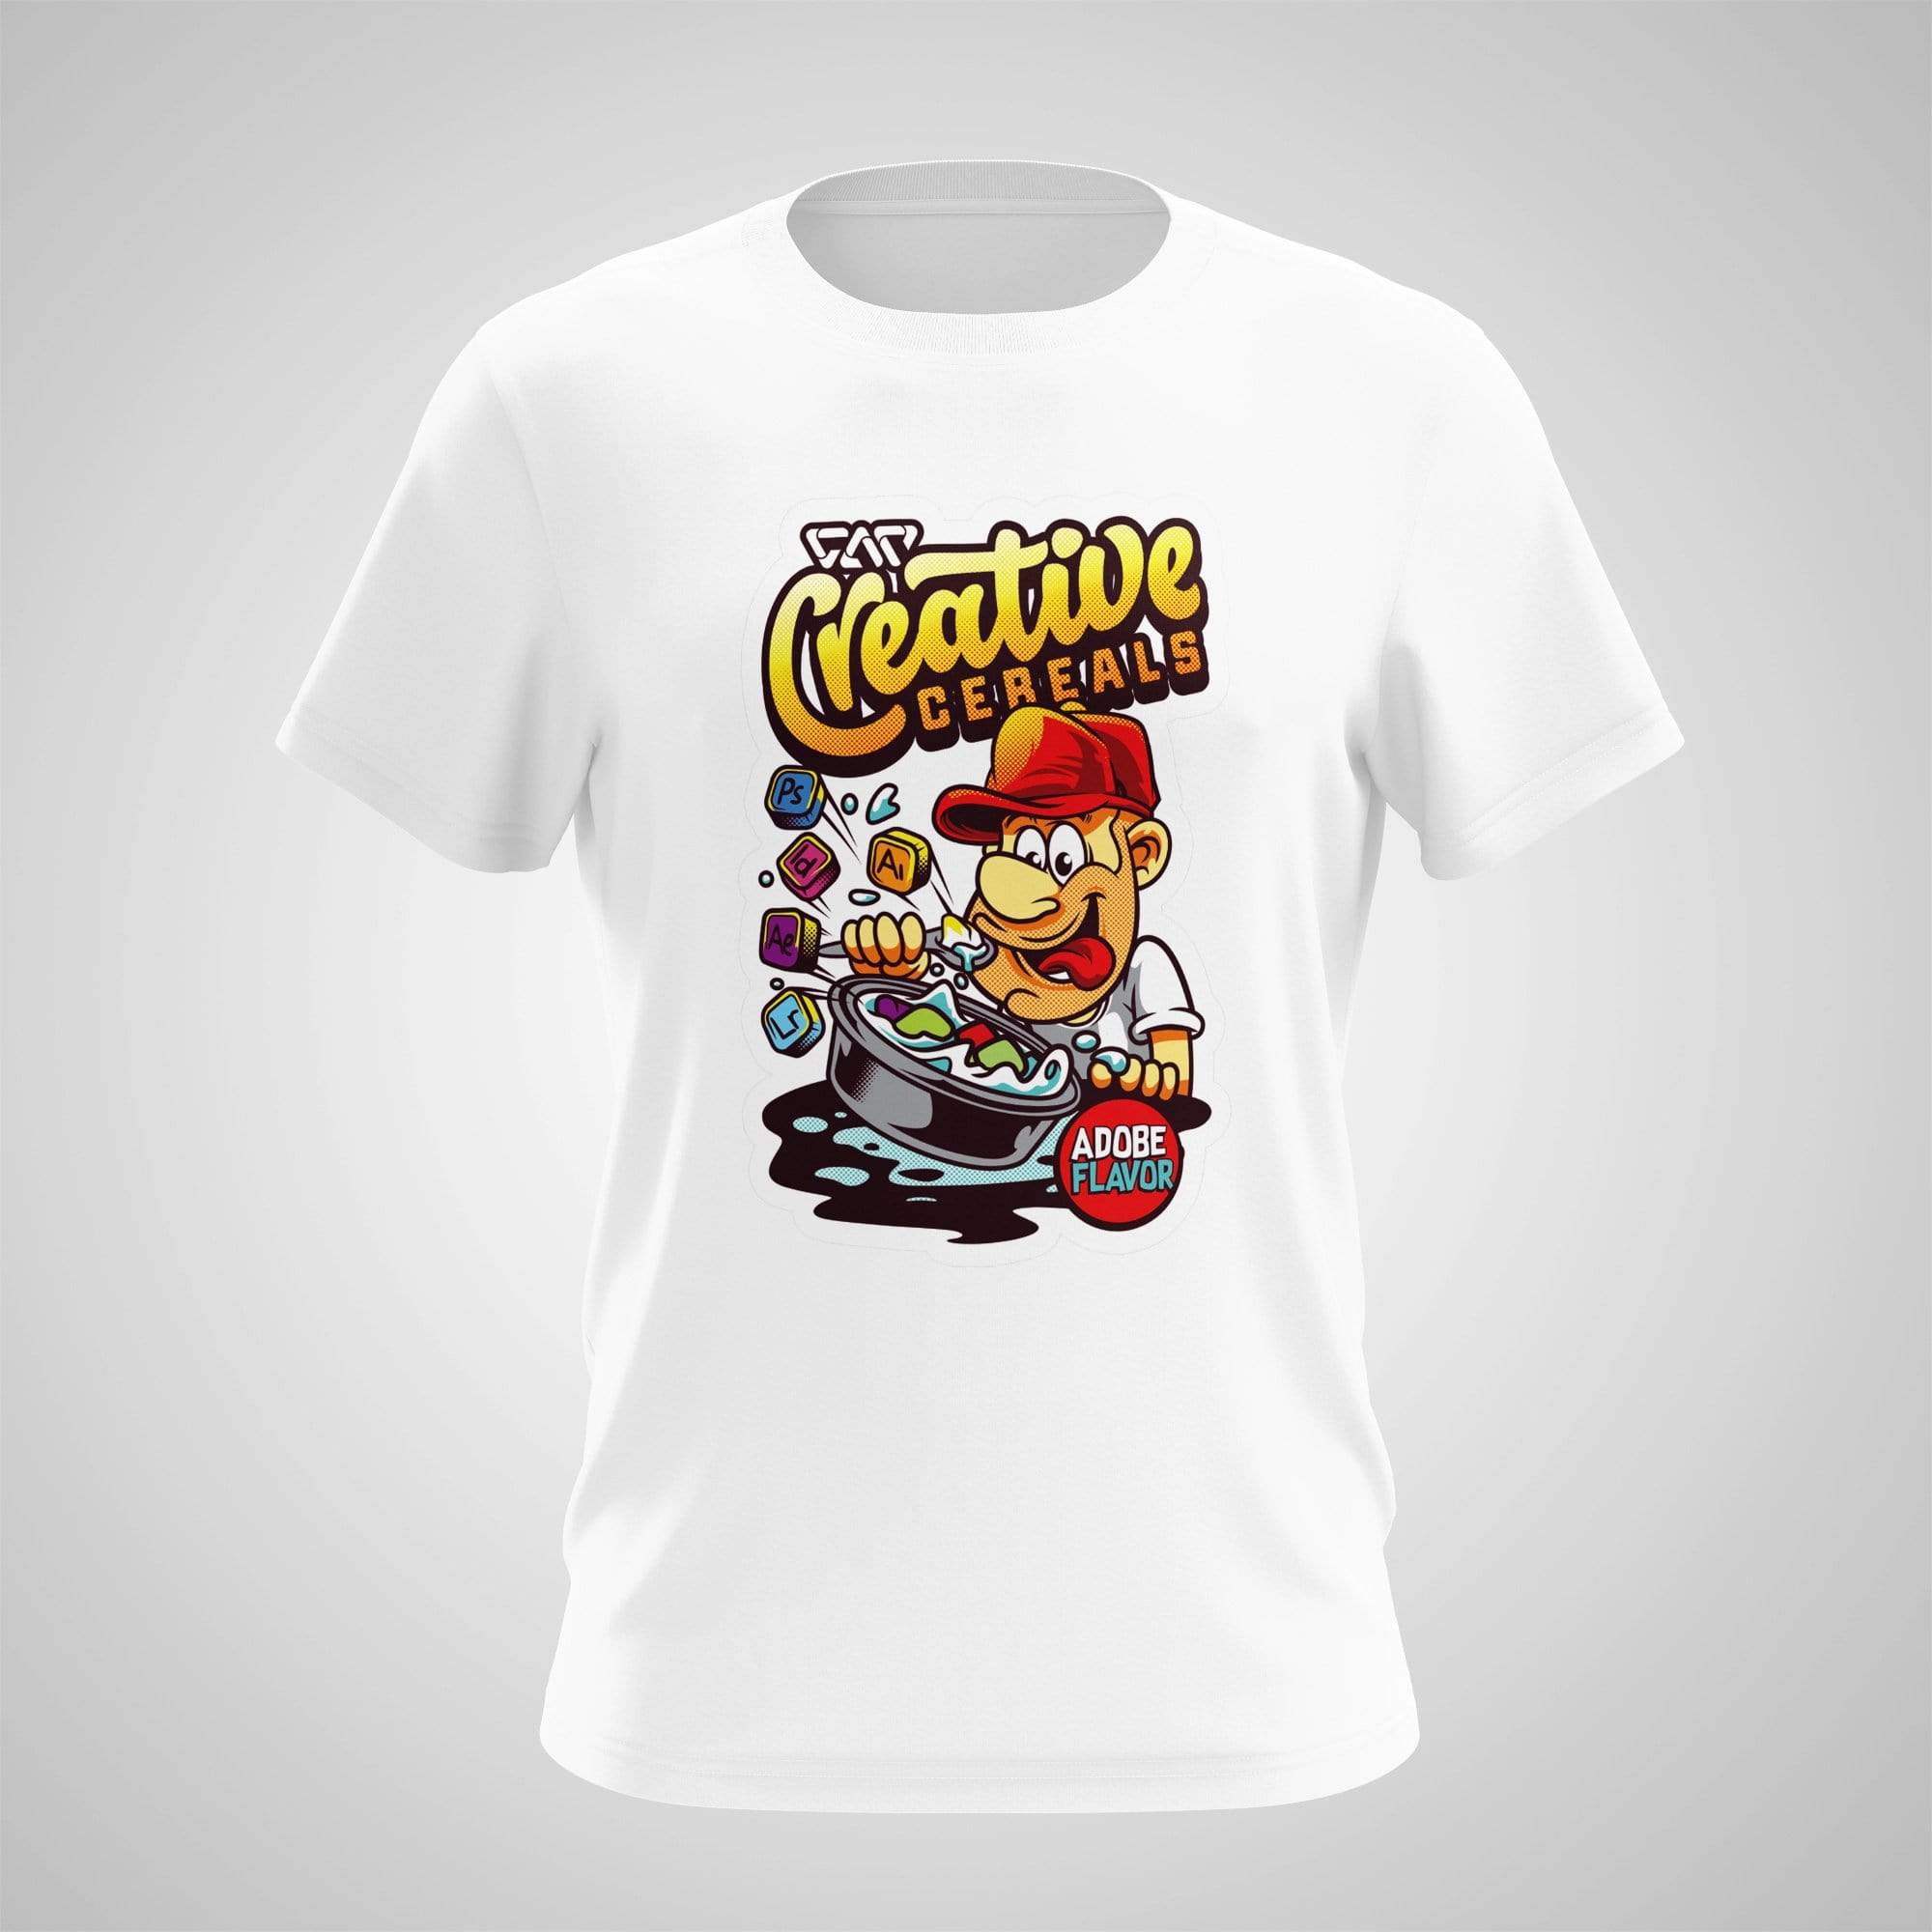 Graphicartistsph - T-Shirts